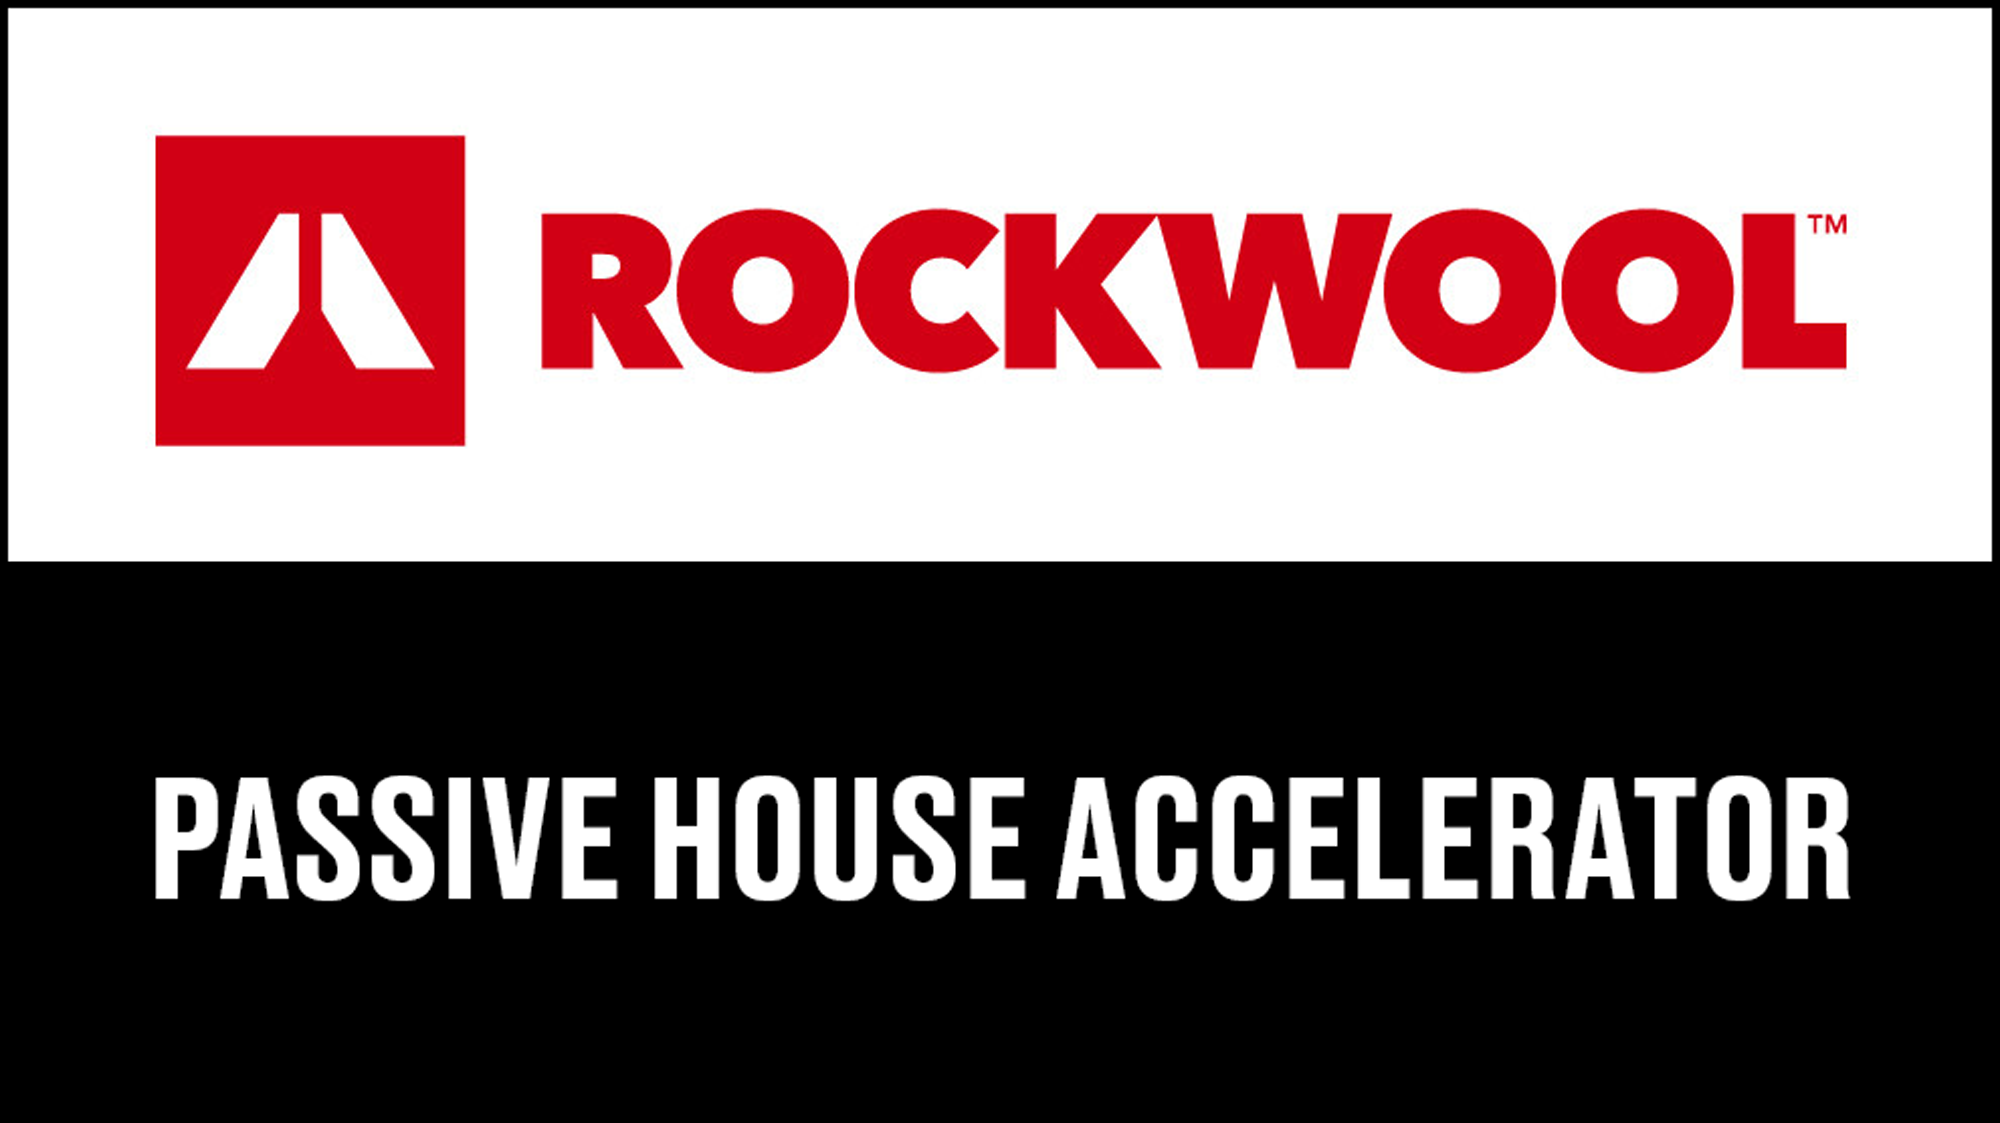 ROCKWOOL Joins Passive House Accelerator, Completing Its Circle of Founding Sponsors